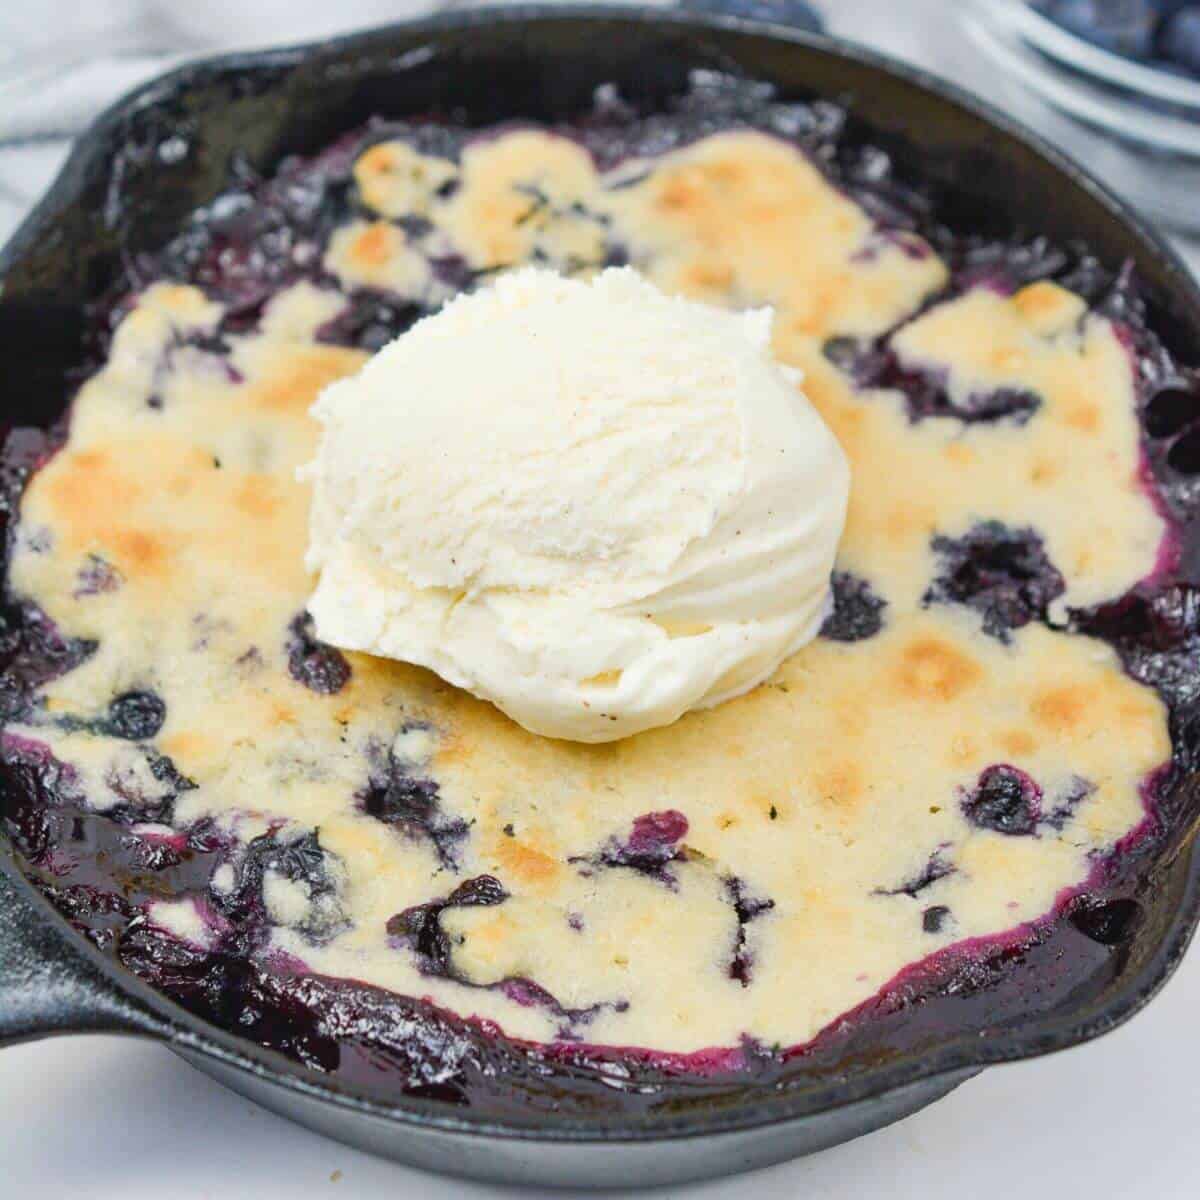 Cobbler in cast iron skillet with vanilla ice cream on top.